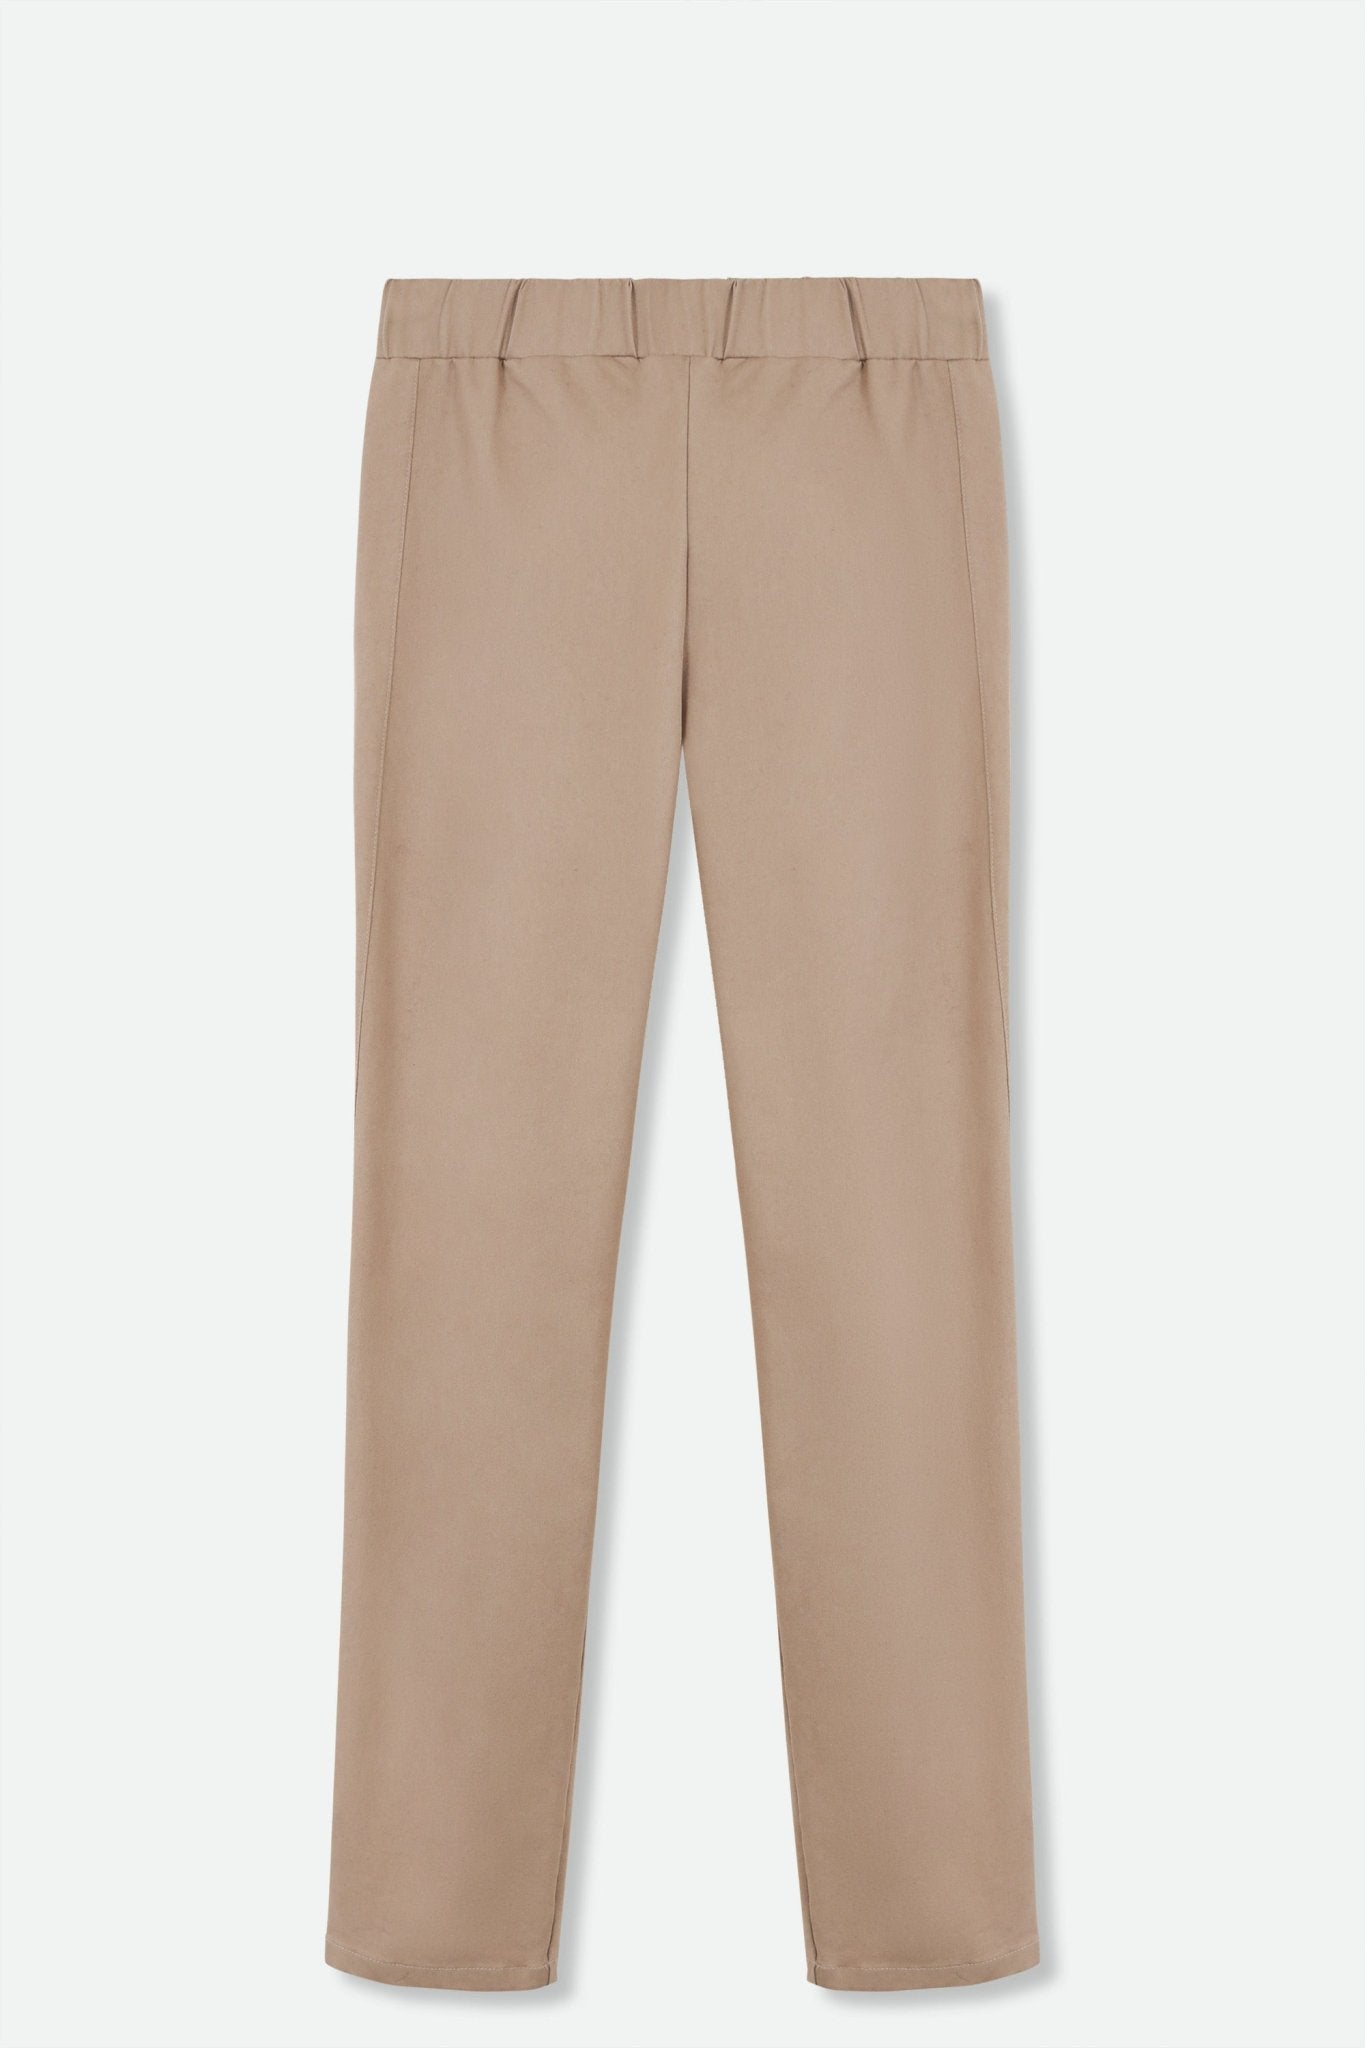 PERRYN PANT IN TECHNICAL COTTON STRETCH IN CACAO SAHARA - Jarbo